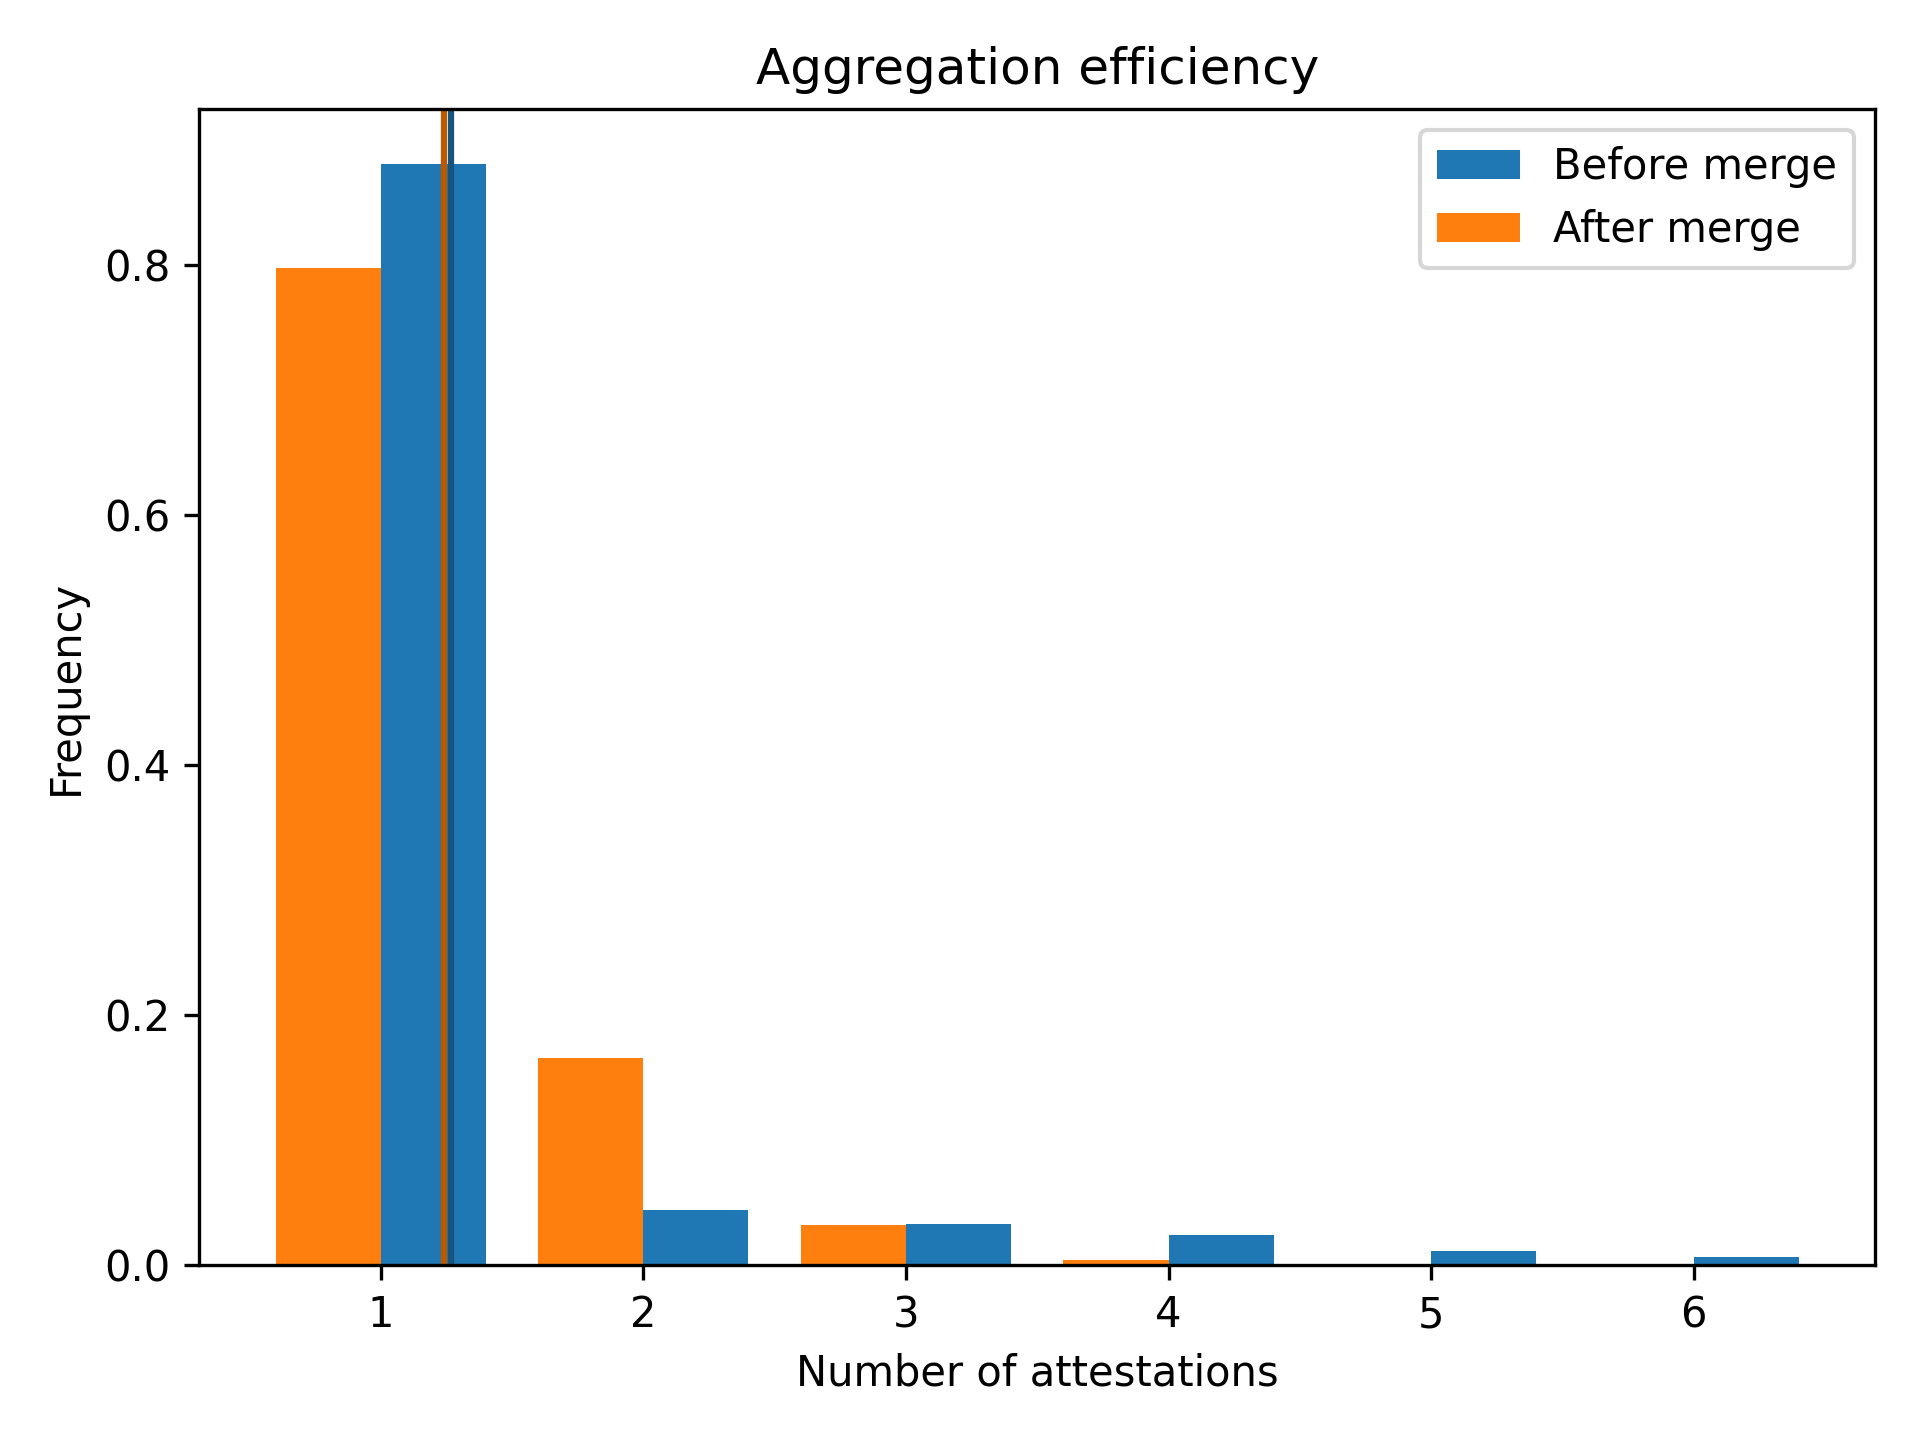 The efficiency of aggregation measured as the number of attestations at the end of the aggregation process.